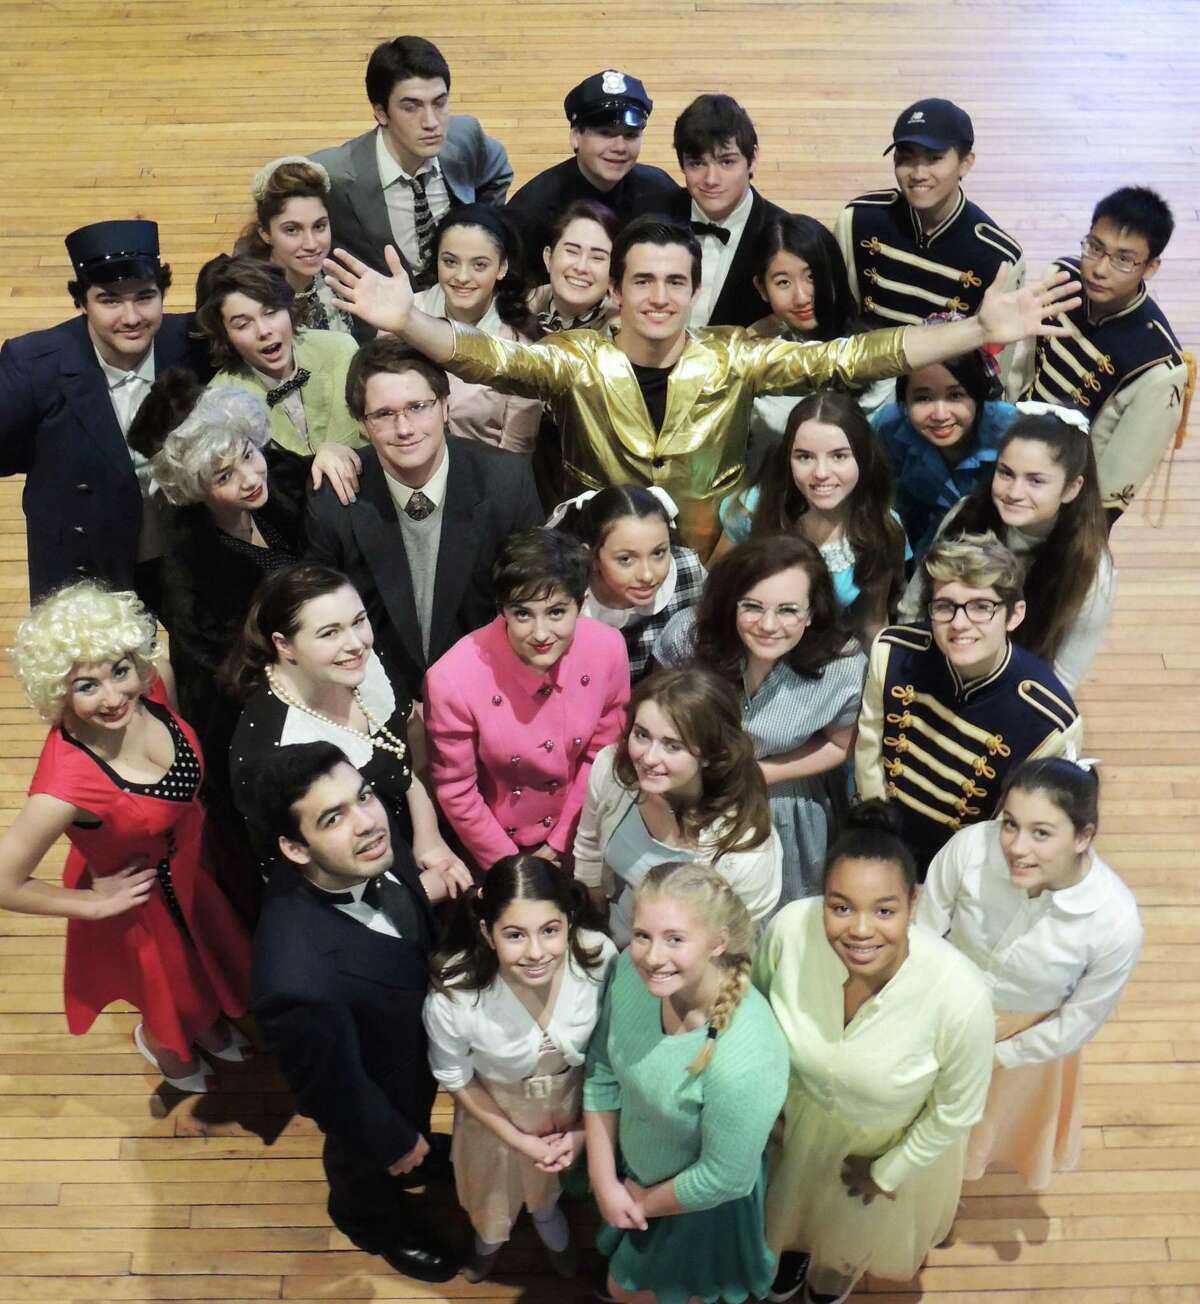 The Gunnery Drama Society at The Gunnery in Washington will continue its production of ”Bye, Bye Birdie” March 3-4 at 7 p.m. at the school’s Lemcke Theater of the Emerson Performing Arts. For more information, call 860-868-7334.